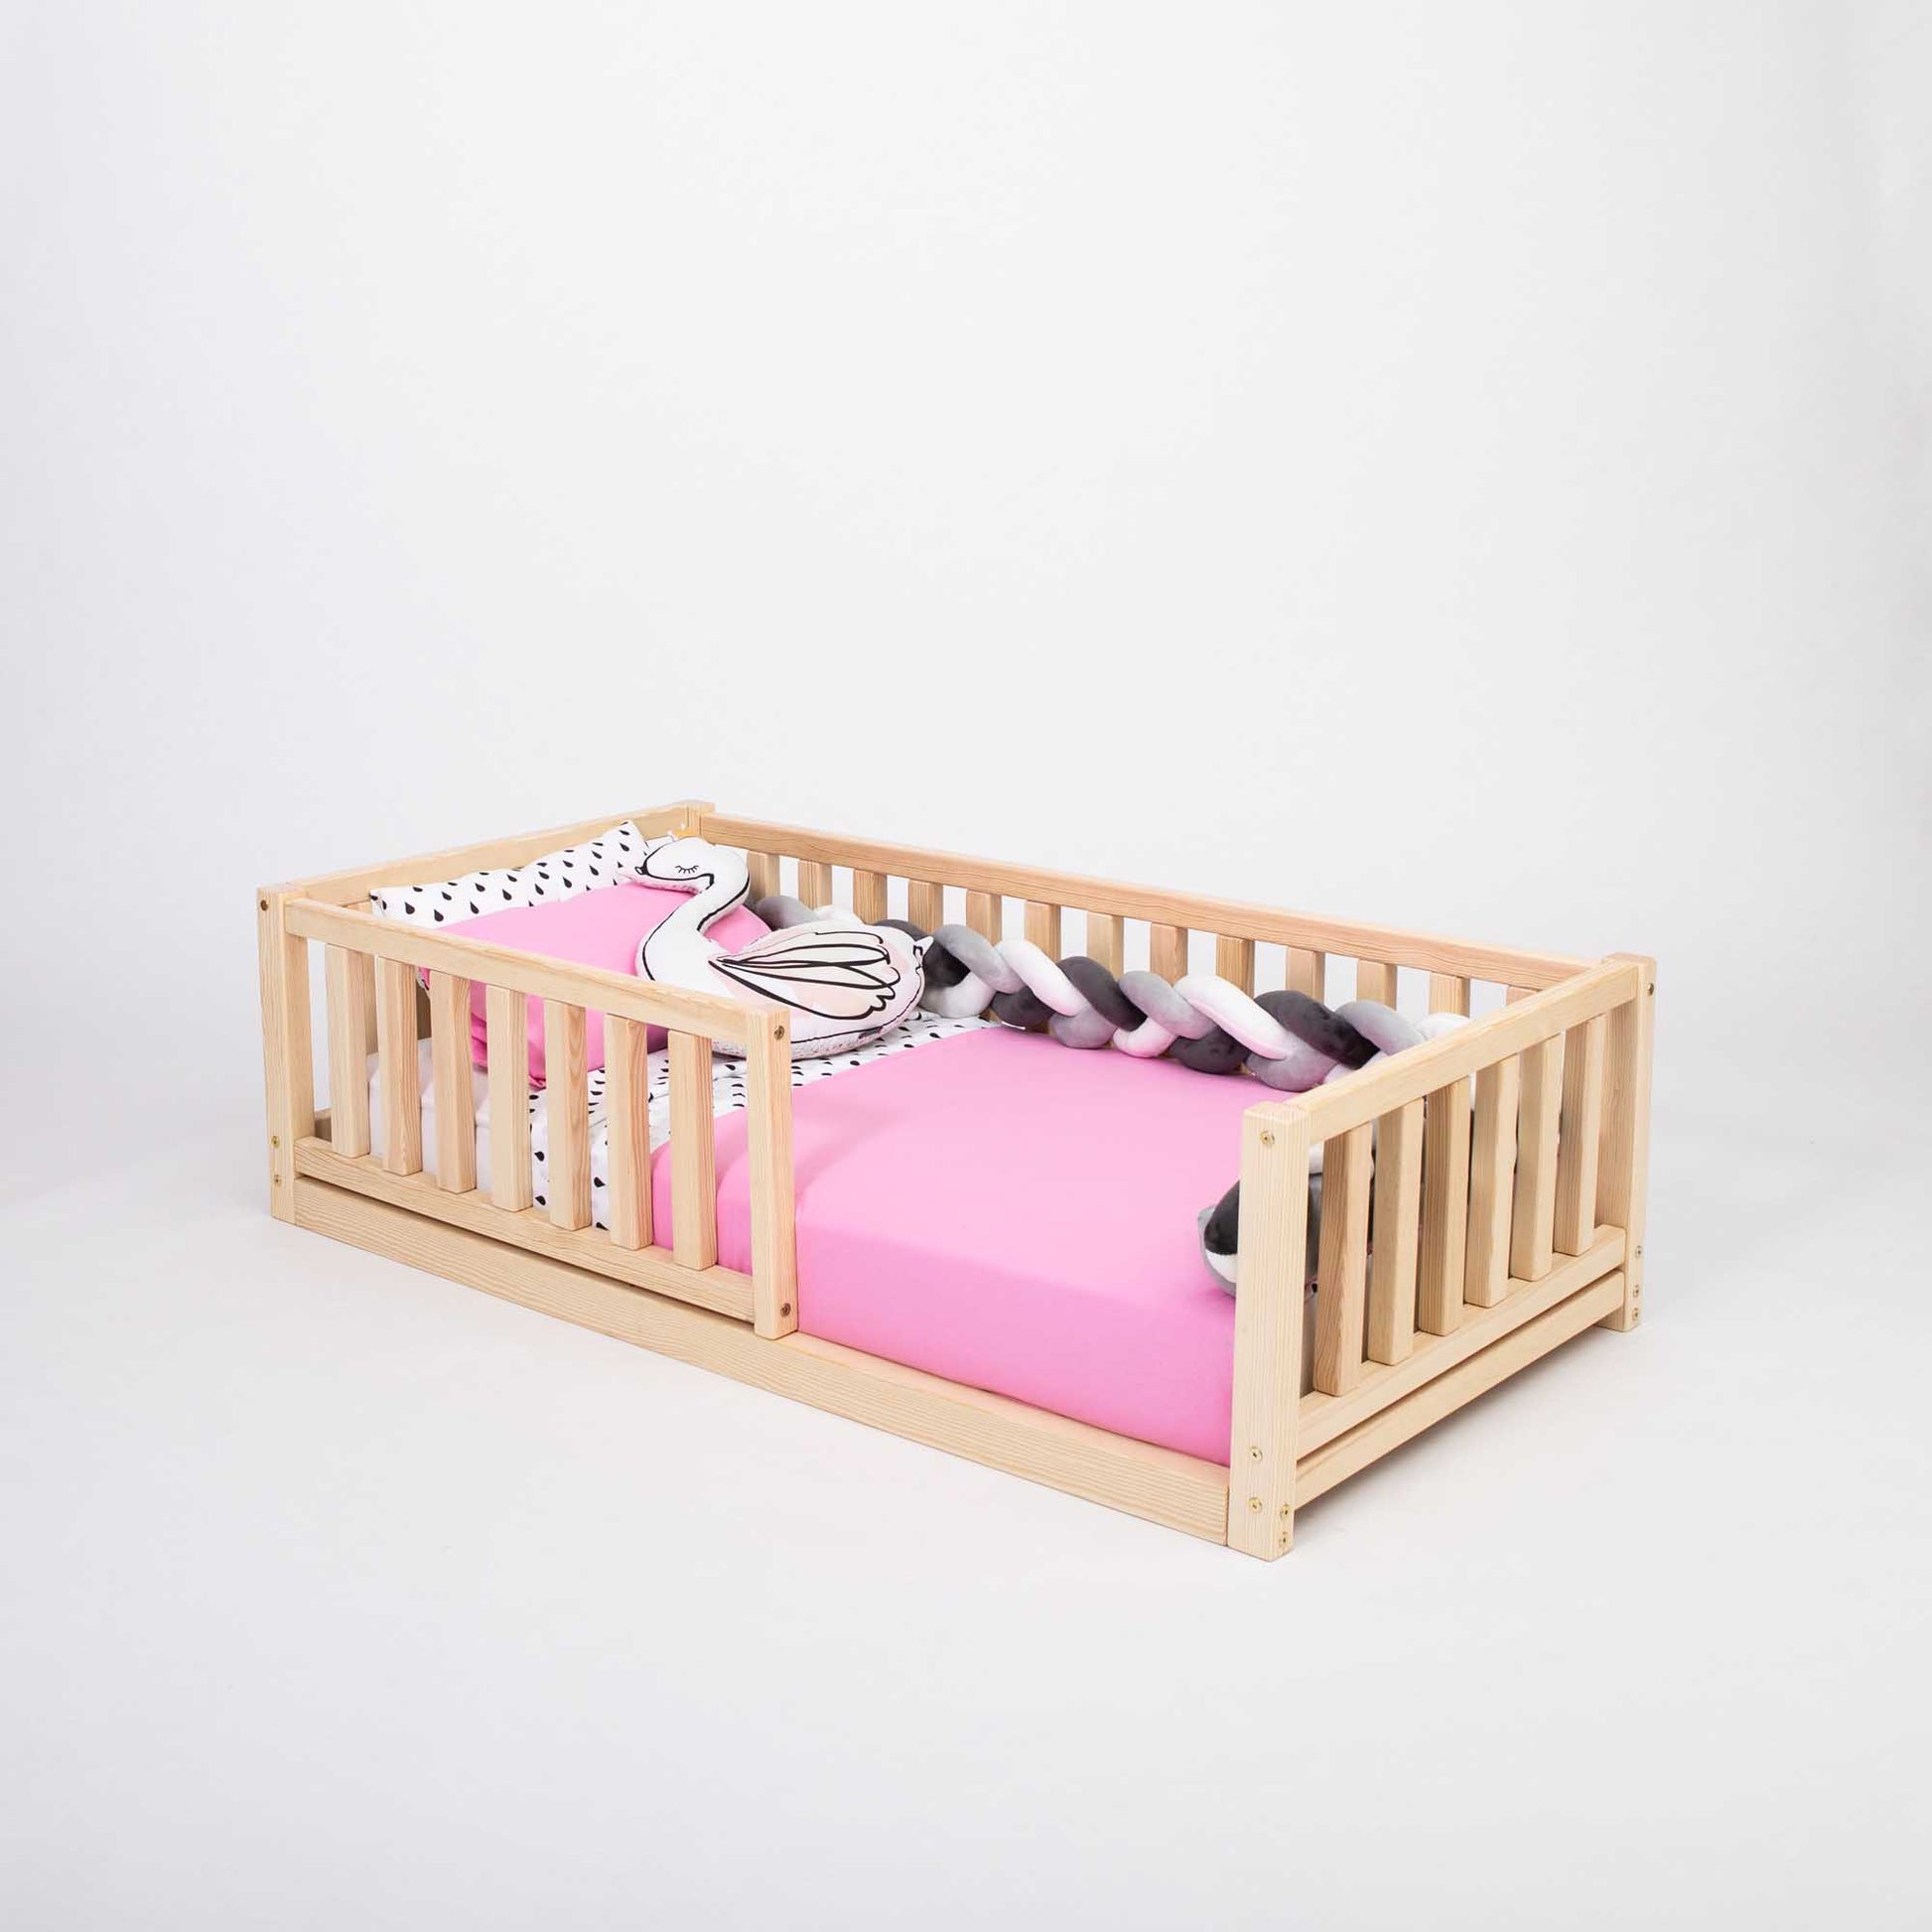 A Montessori kids' bed with a fence by Sweet Home From Wood, offering independent sleeping and security for your child.